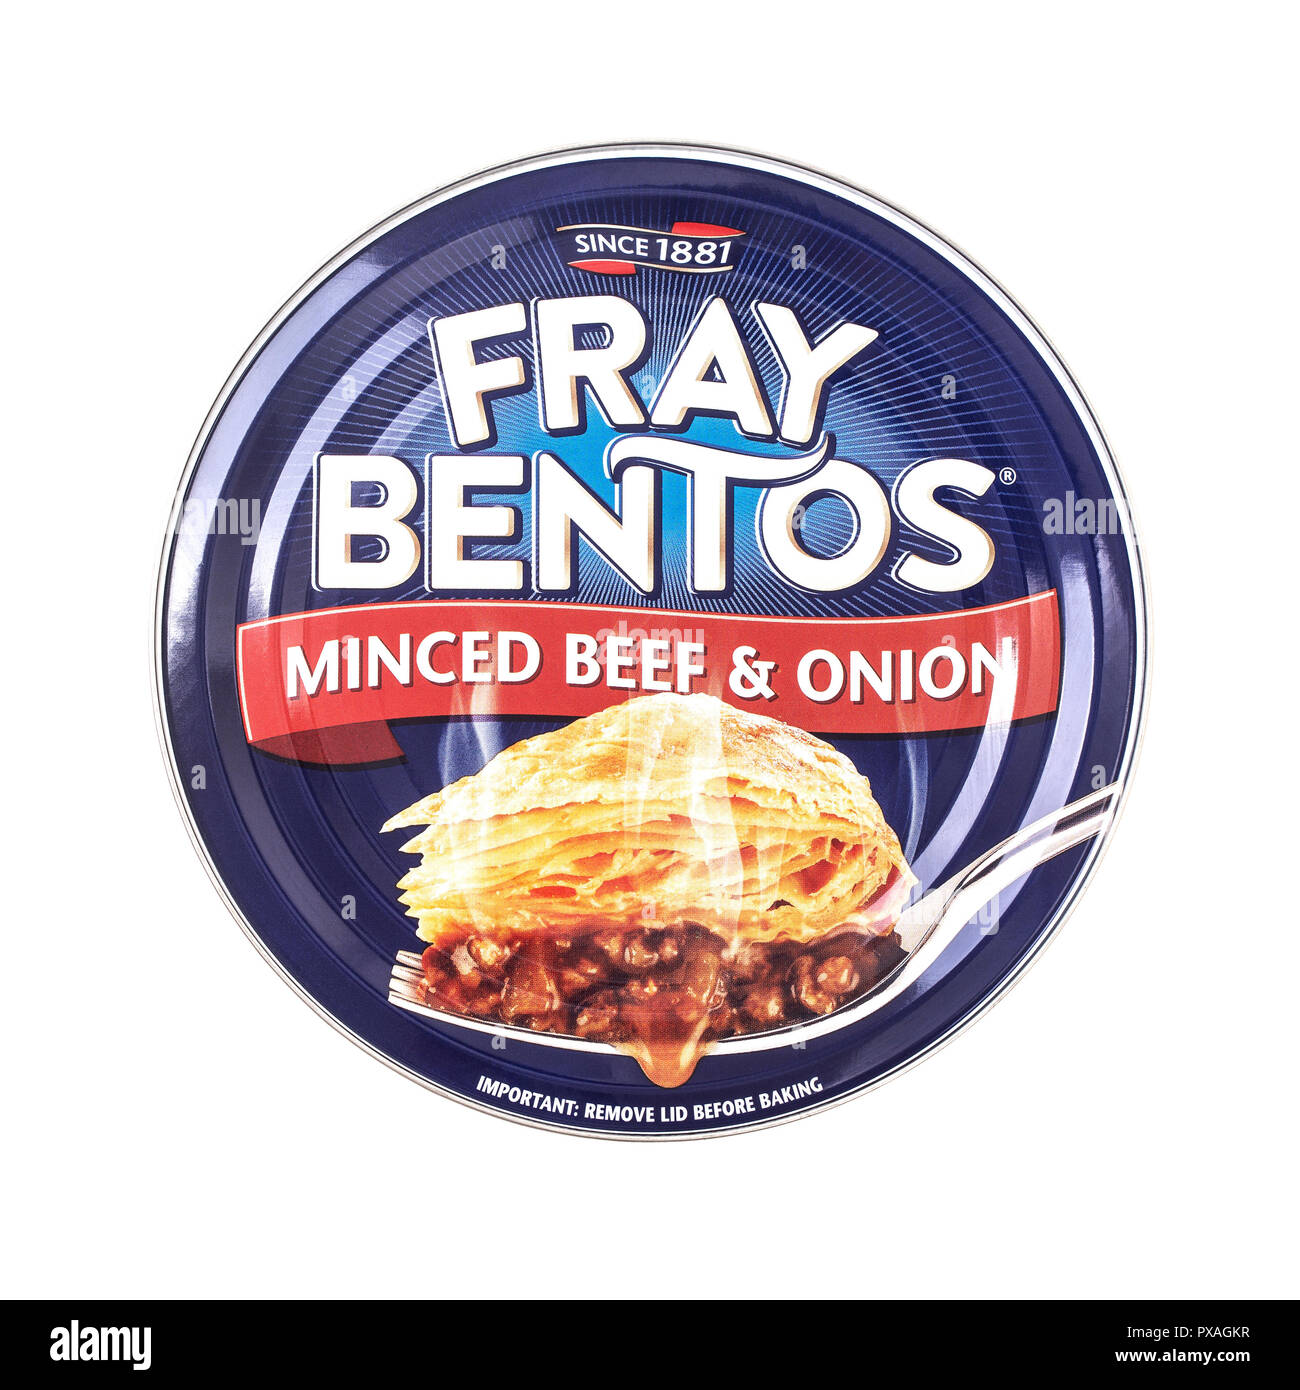 SWINDON, UK - OCTOBER 21, 2018: Fray Bentos Mince Beef and Onion Pie on a white background Stock Photo